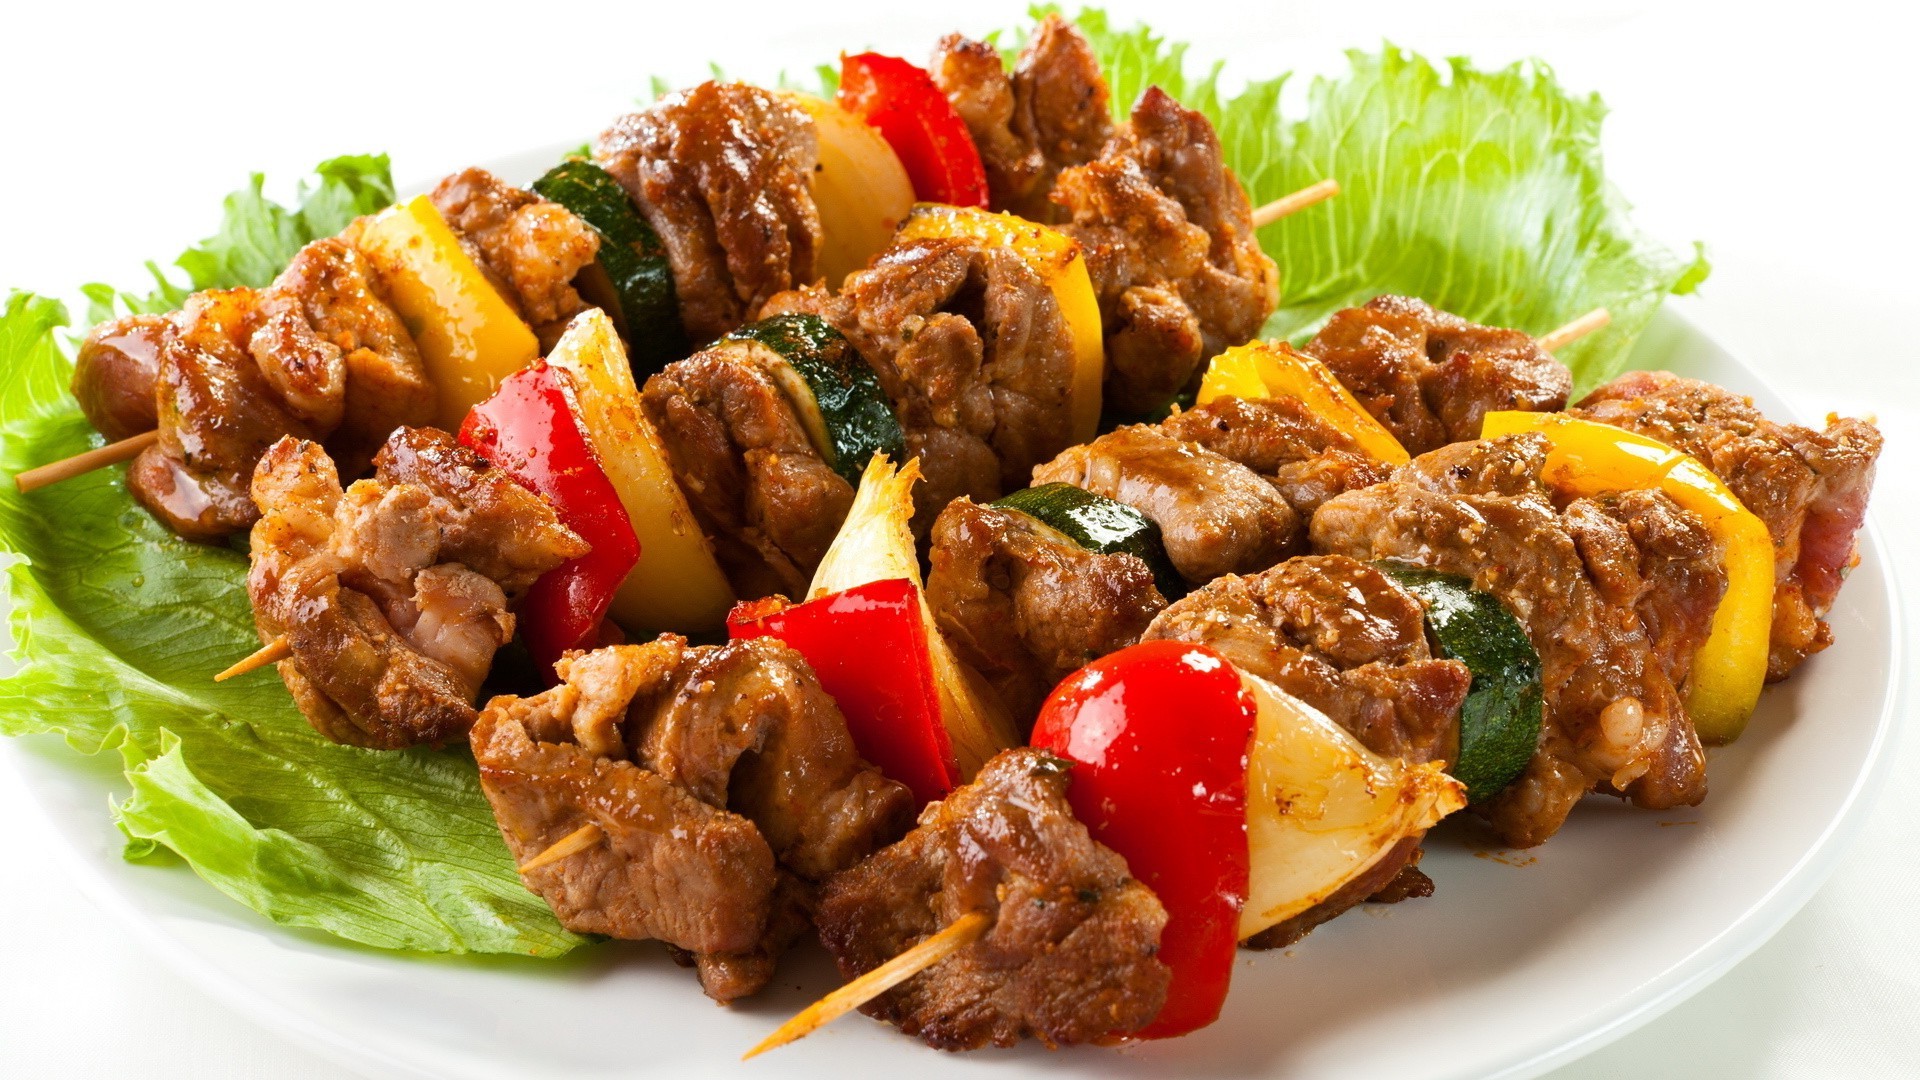 food & drink dinner beef meat food kebab skewer barbecue meal lunch plate pork pepper vegetable onion delicious dish cuisine epicure lamb chicken